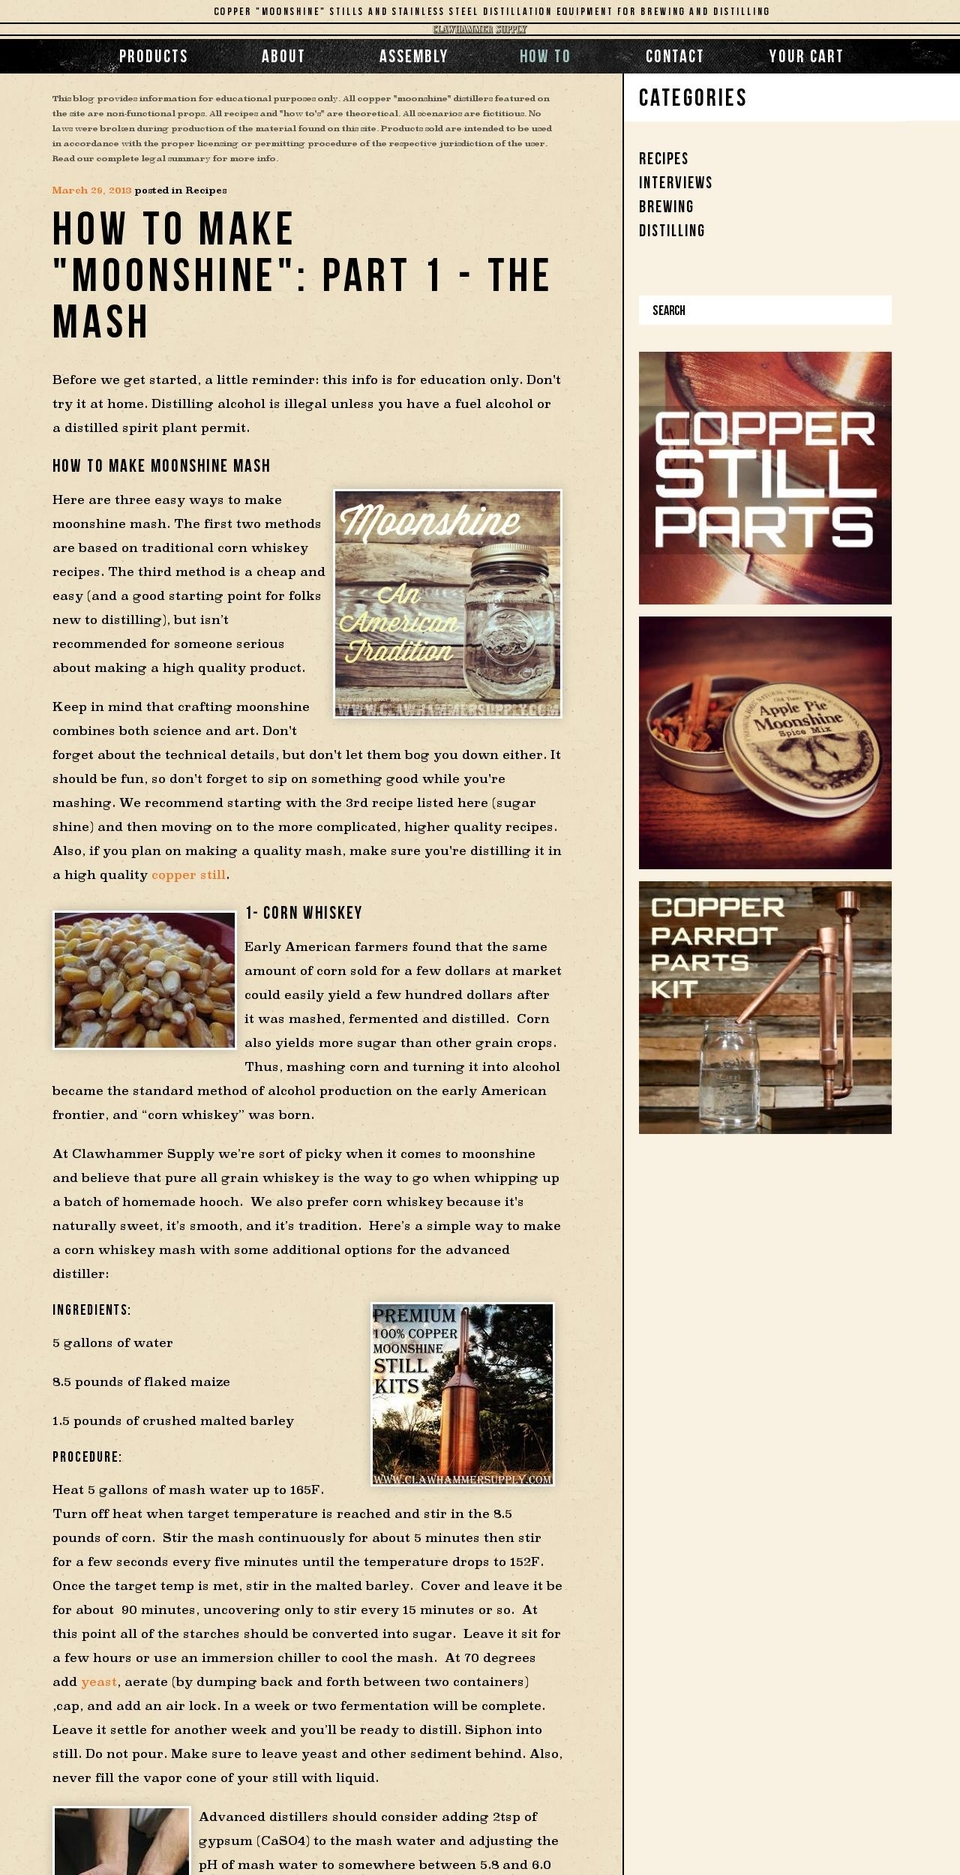 Live Shopify theme site example howtomakemoonshine.com